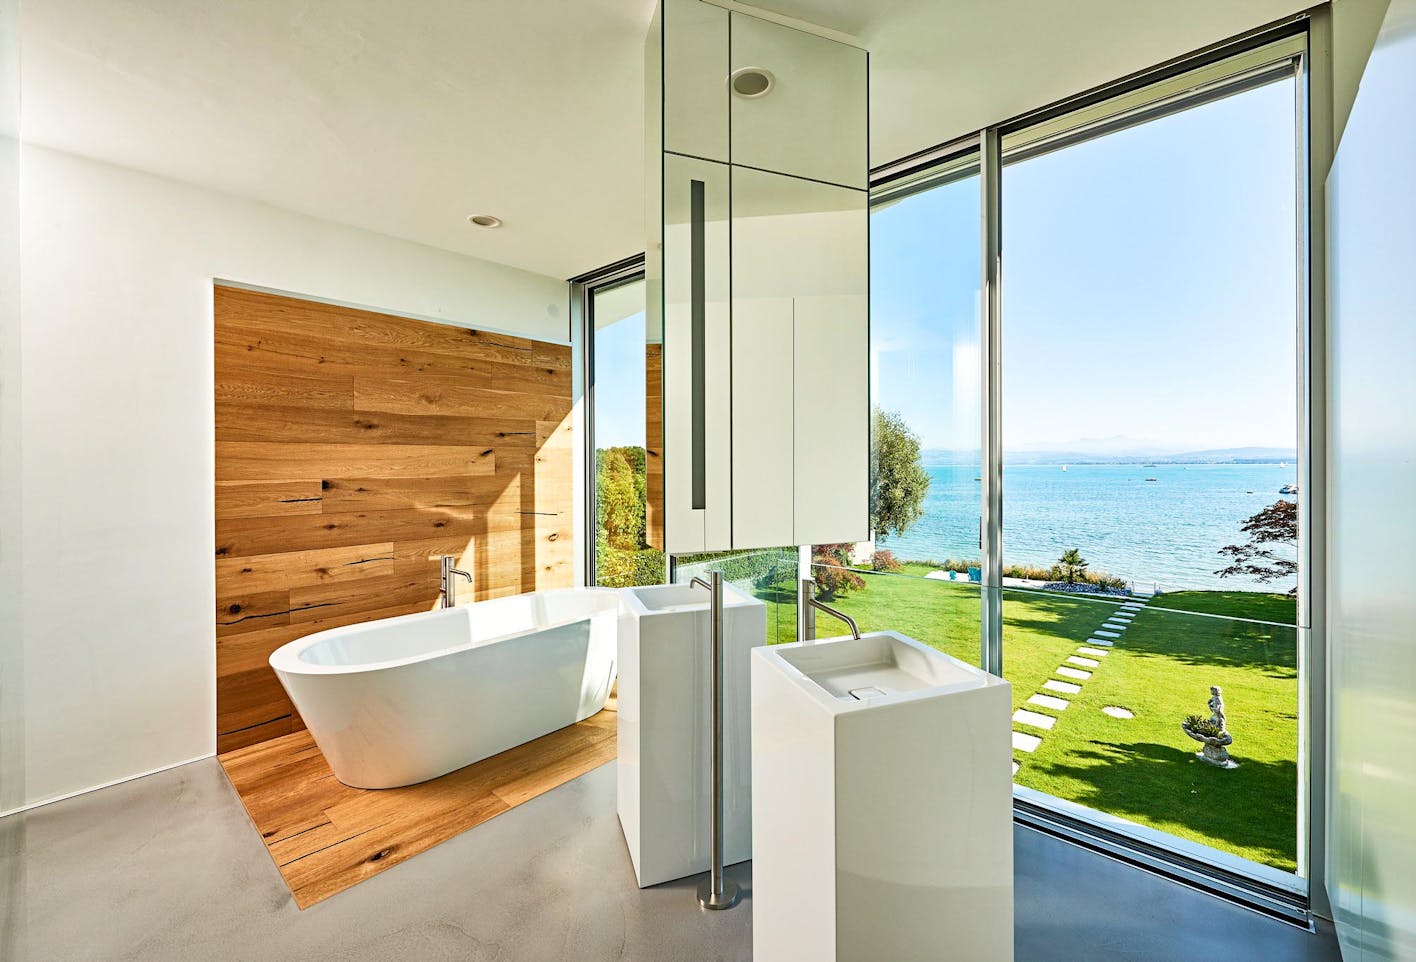 exterior moving glass walls create bathrooms with a view